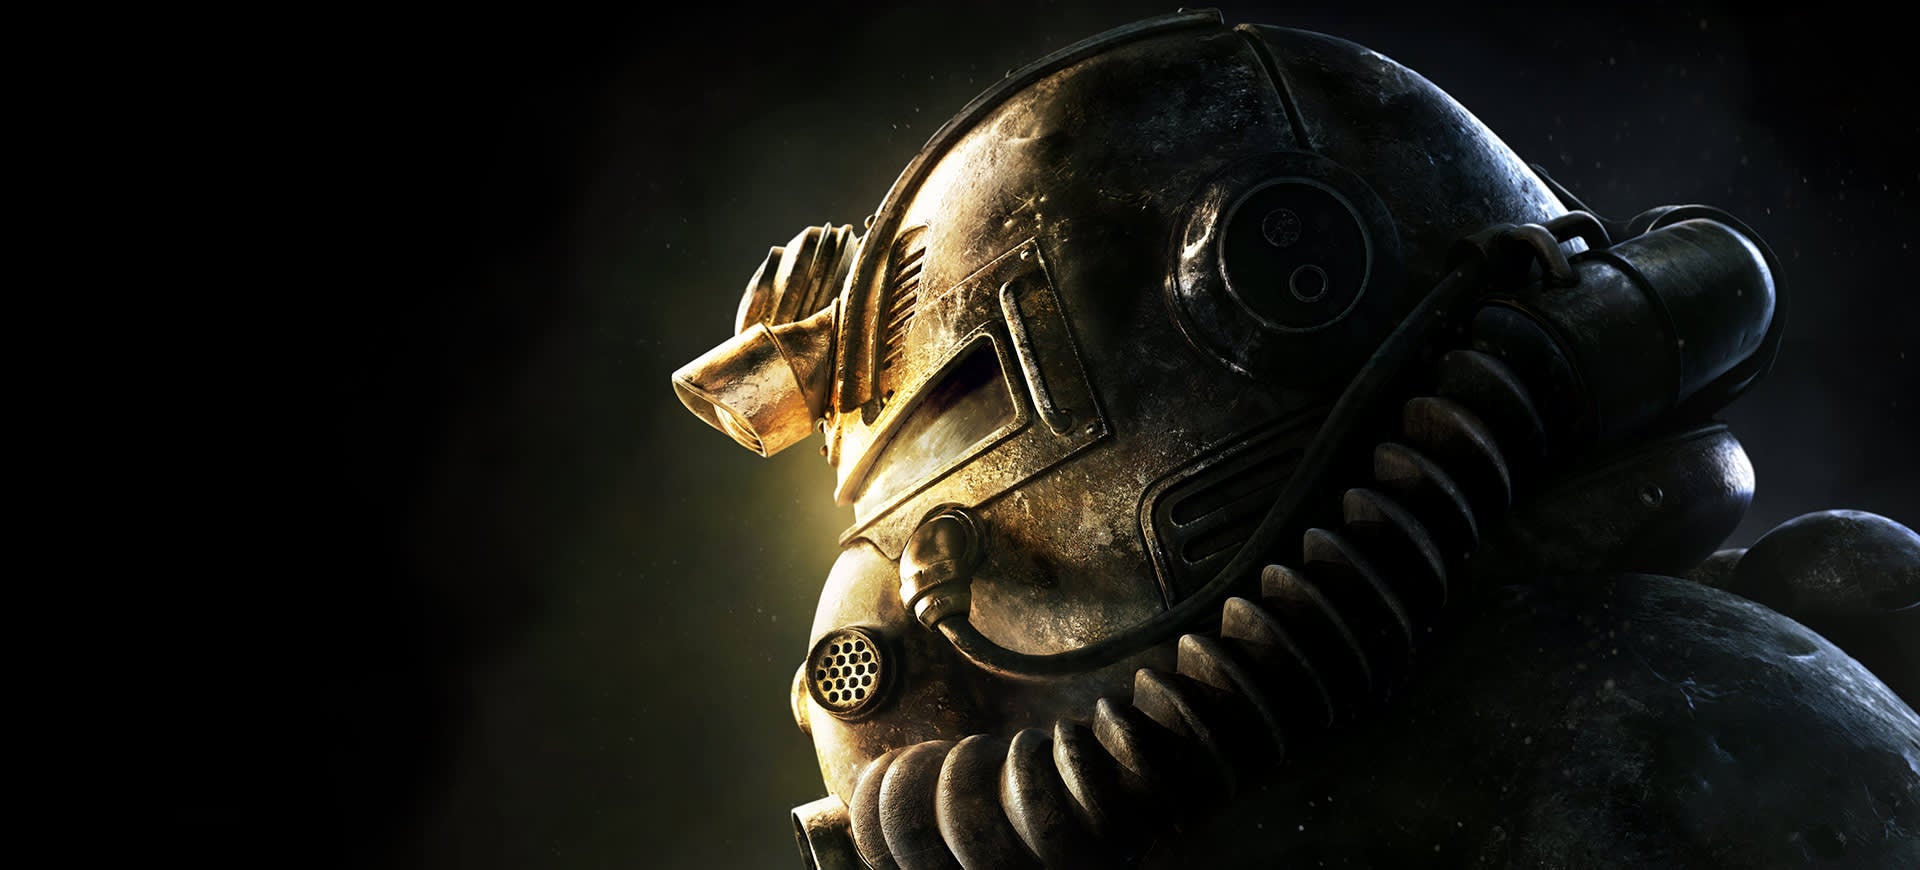 Image for Fallout 76 roadmap reveals a new alien threat, public events, expeditions, more